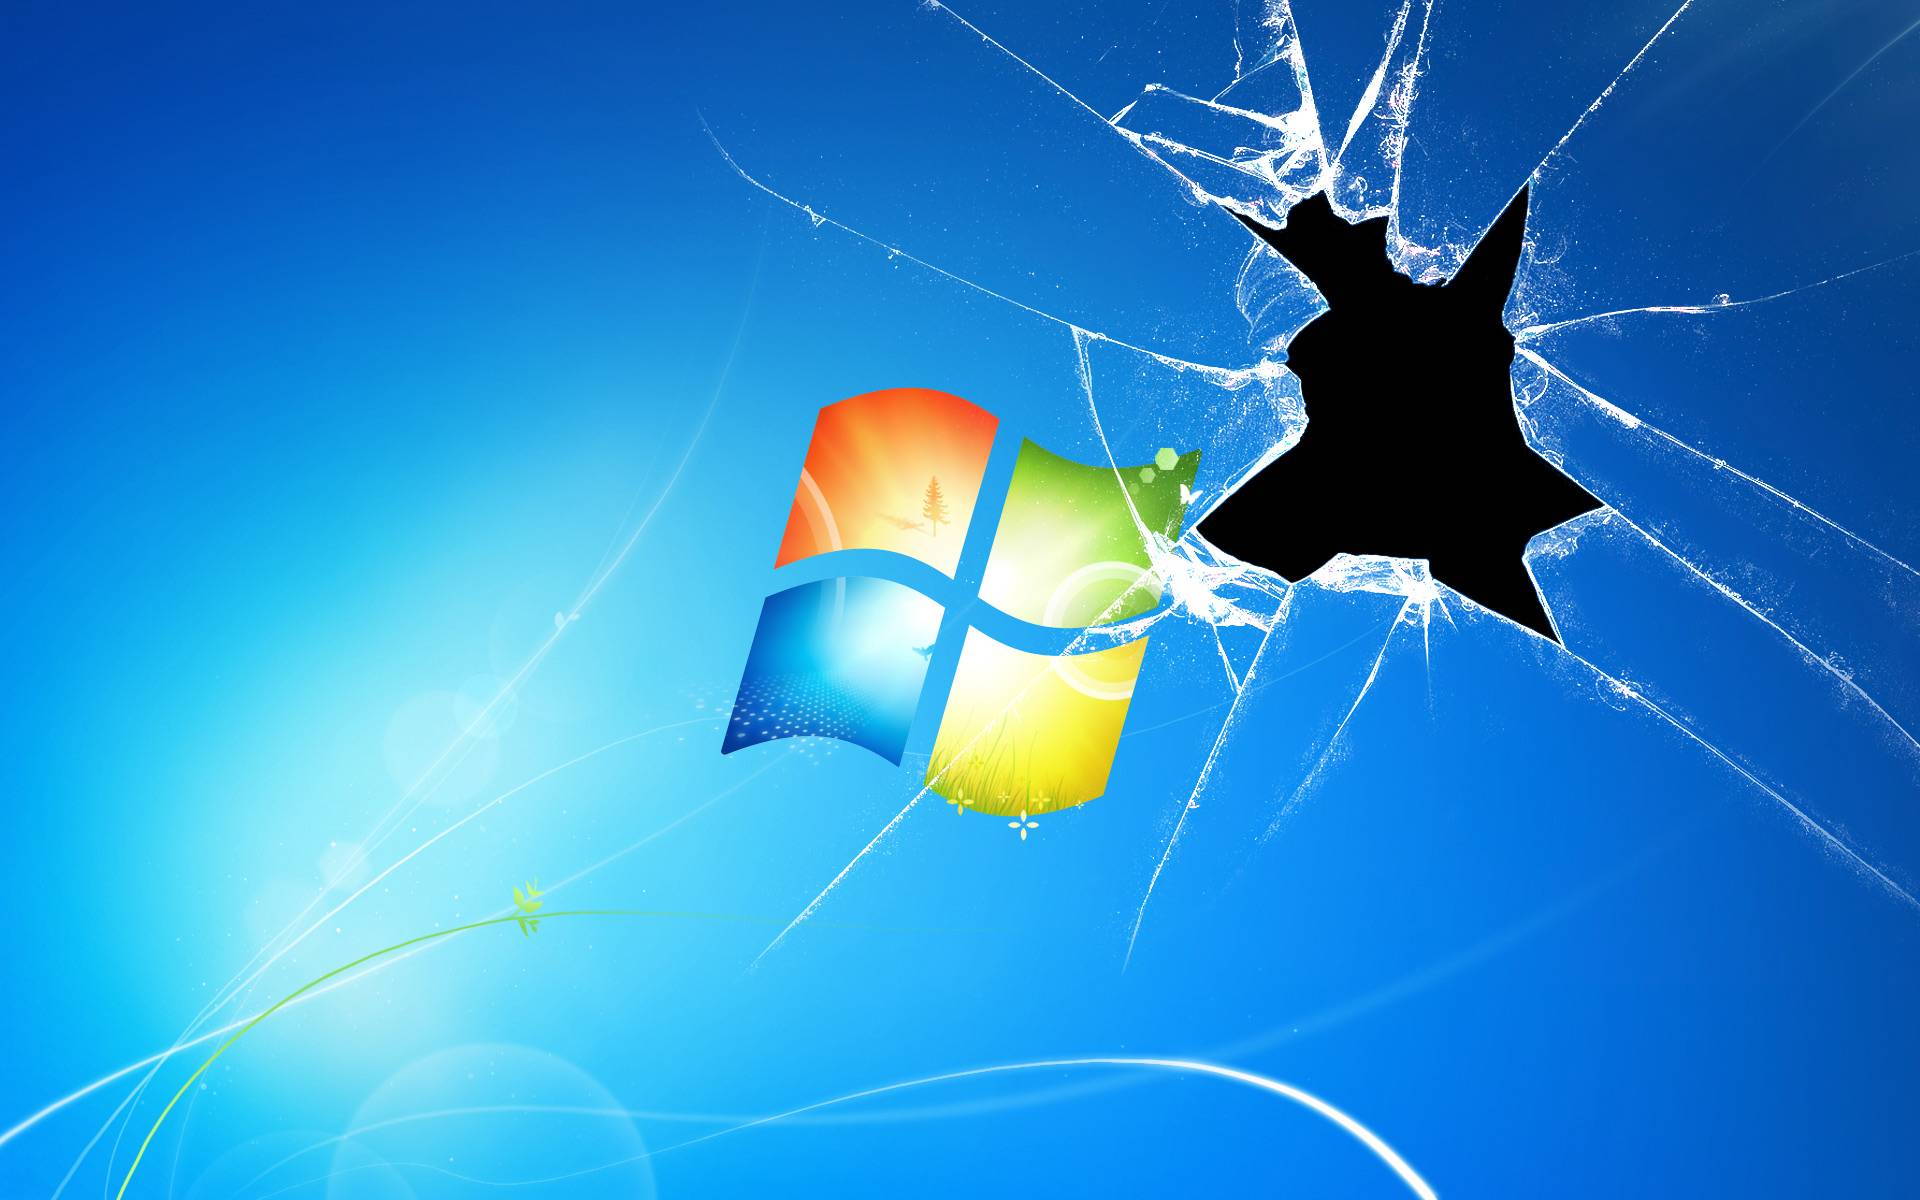 Cracked Screen Windows Exclusive HD Wallpapers 2261